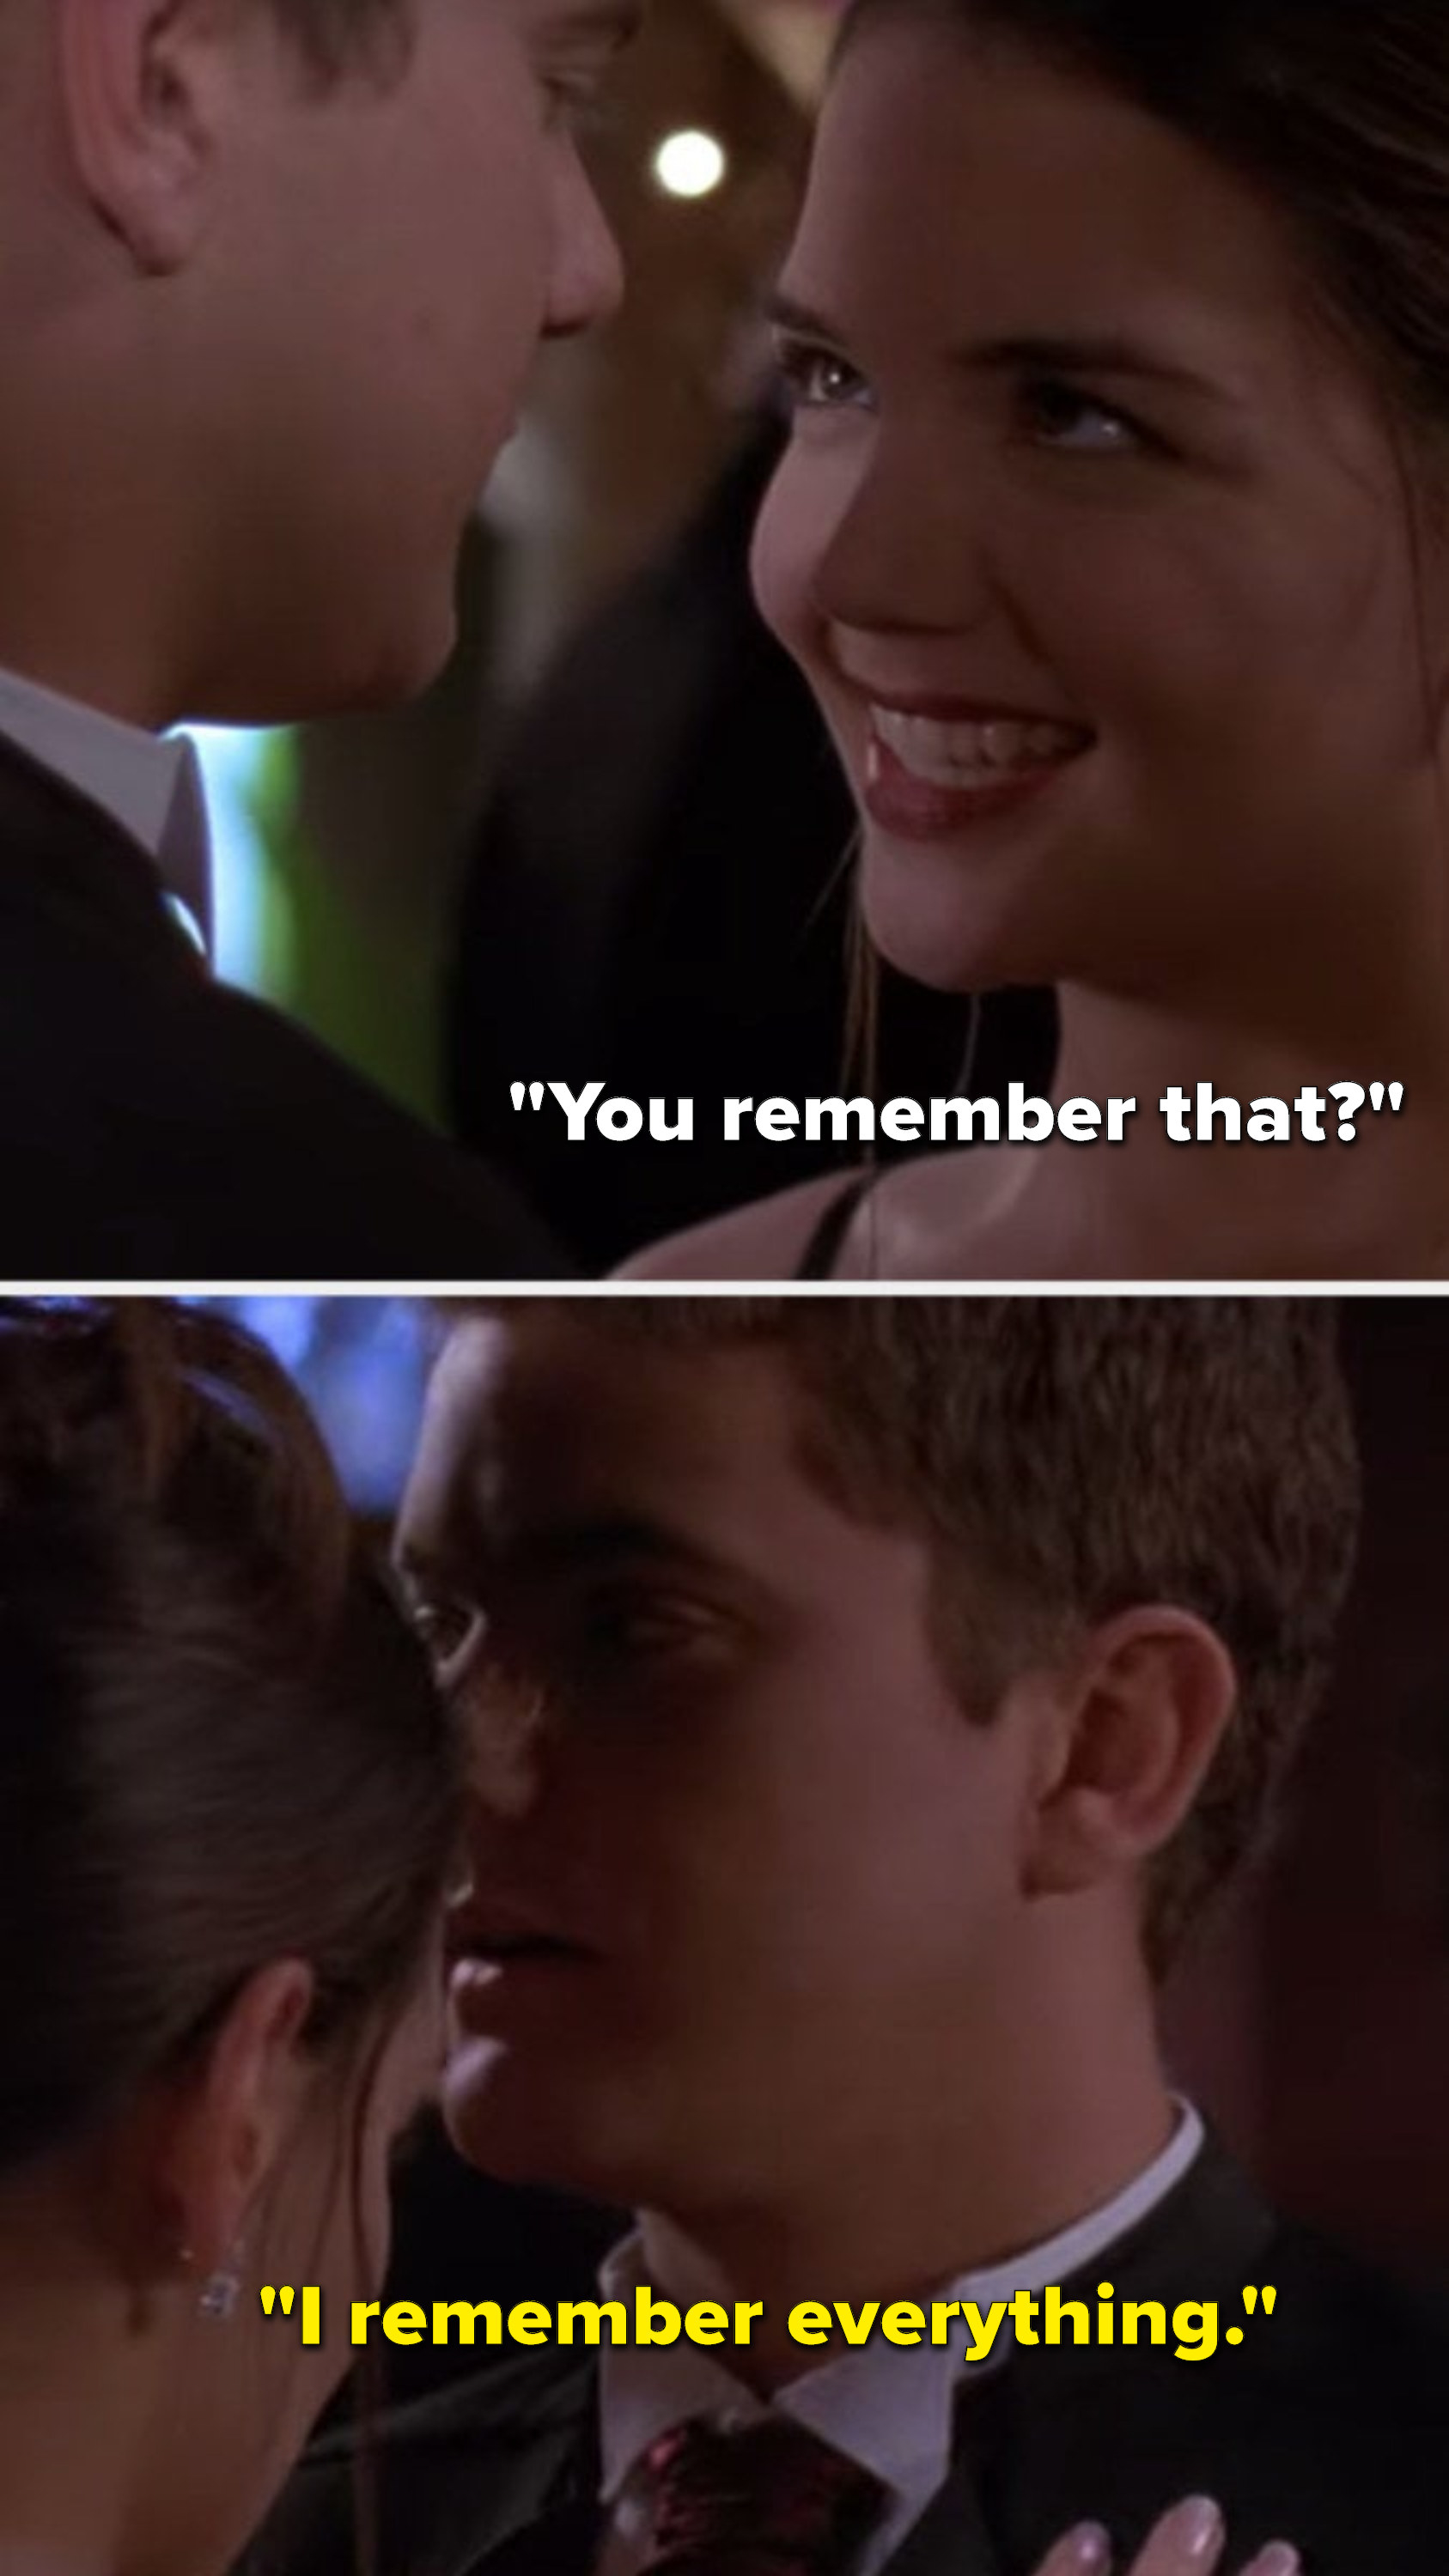 Joey asks, &quot;You remember that,&quot; and Pacey says, &quot;I remember everything&quot;